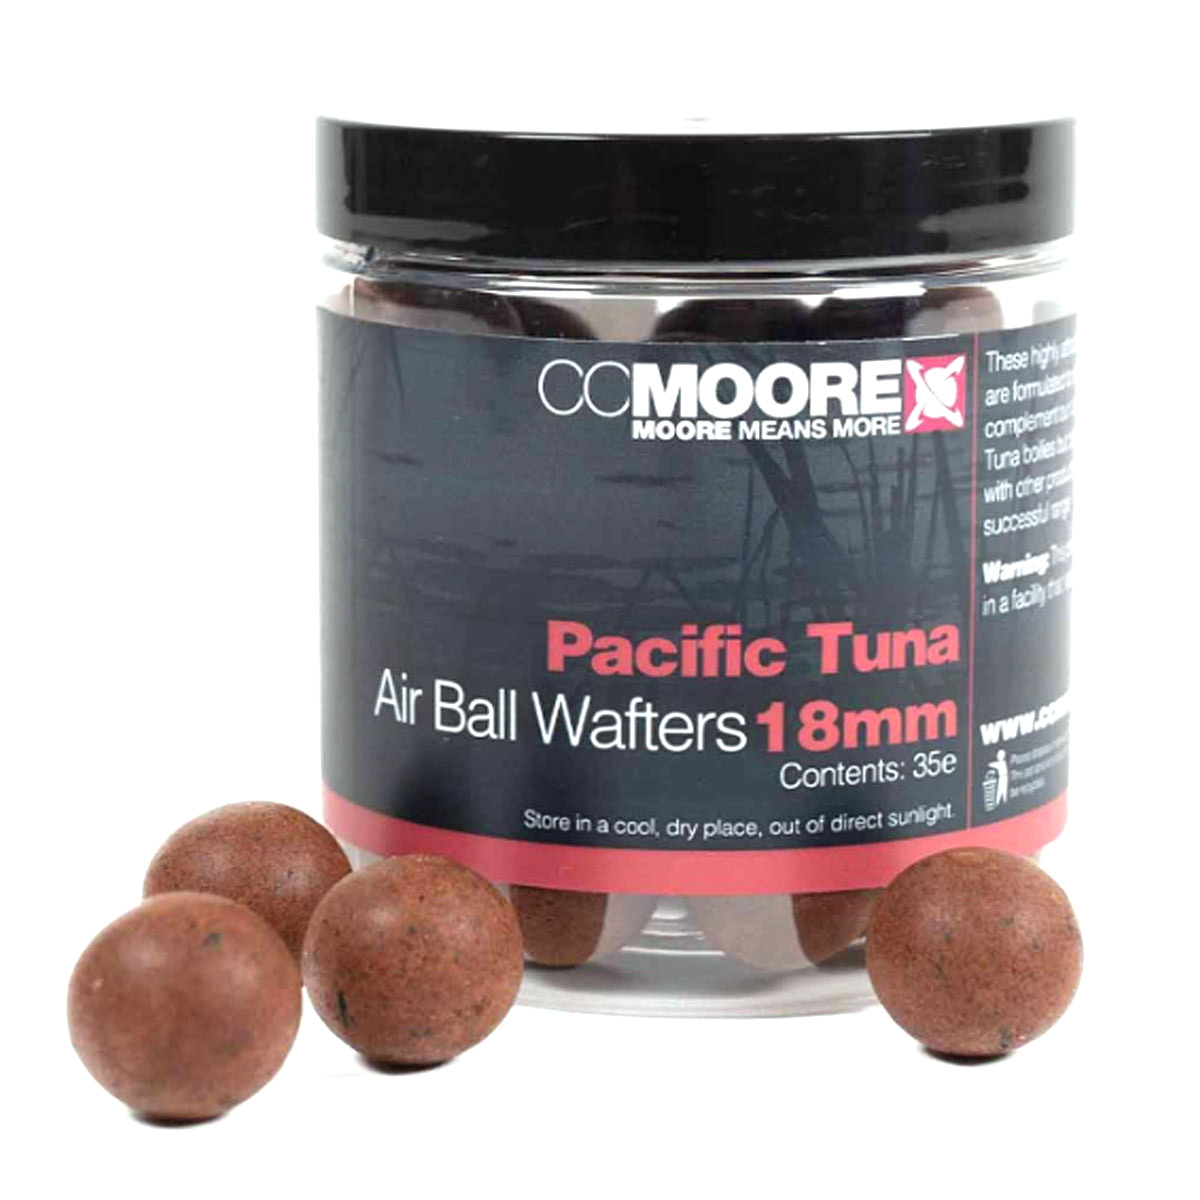 Cc moore Pacific Tuna Air Ball Wafters 18mm